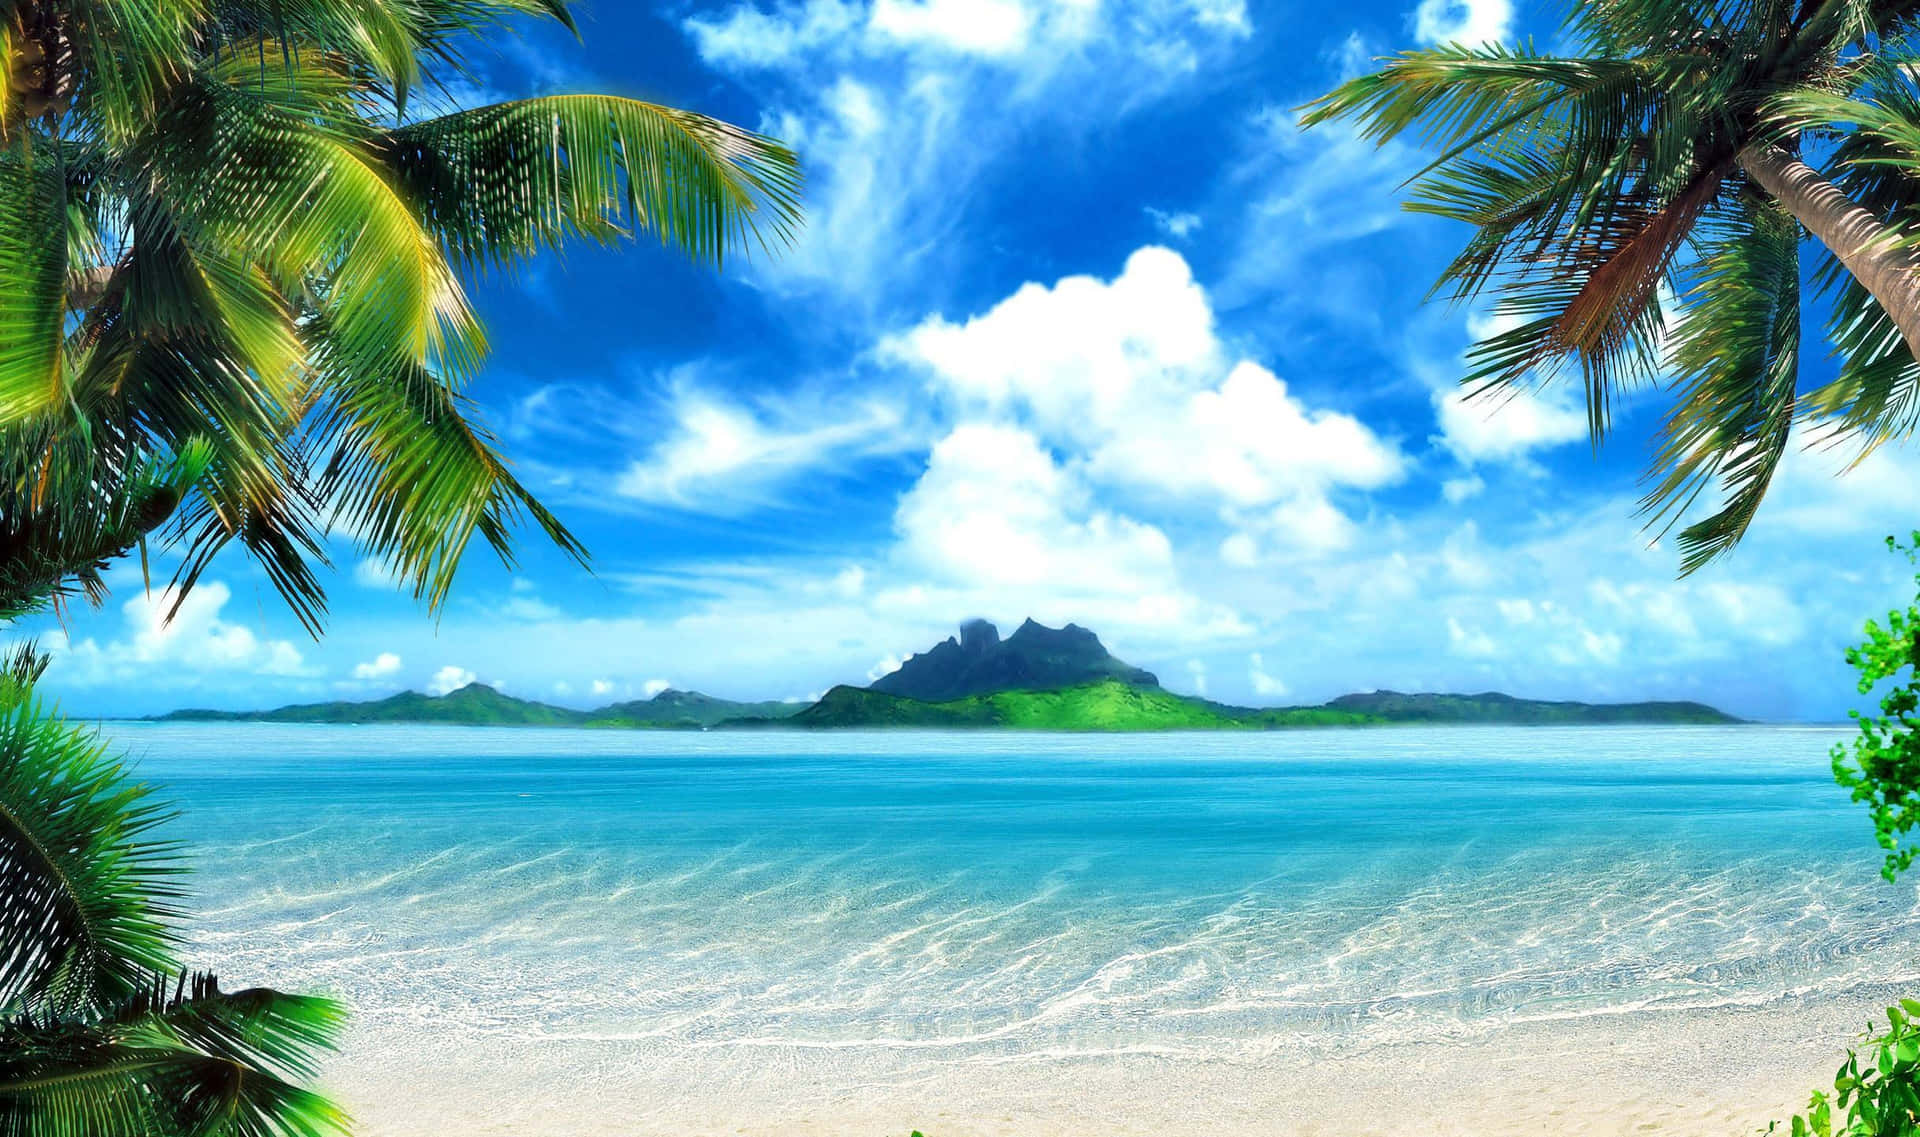 A Tropical Beach With Palm Trees And Blue Water